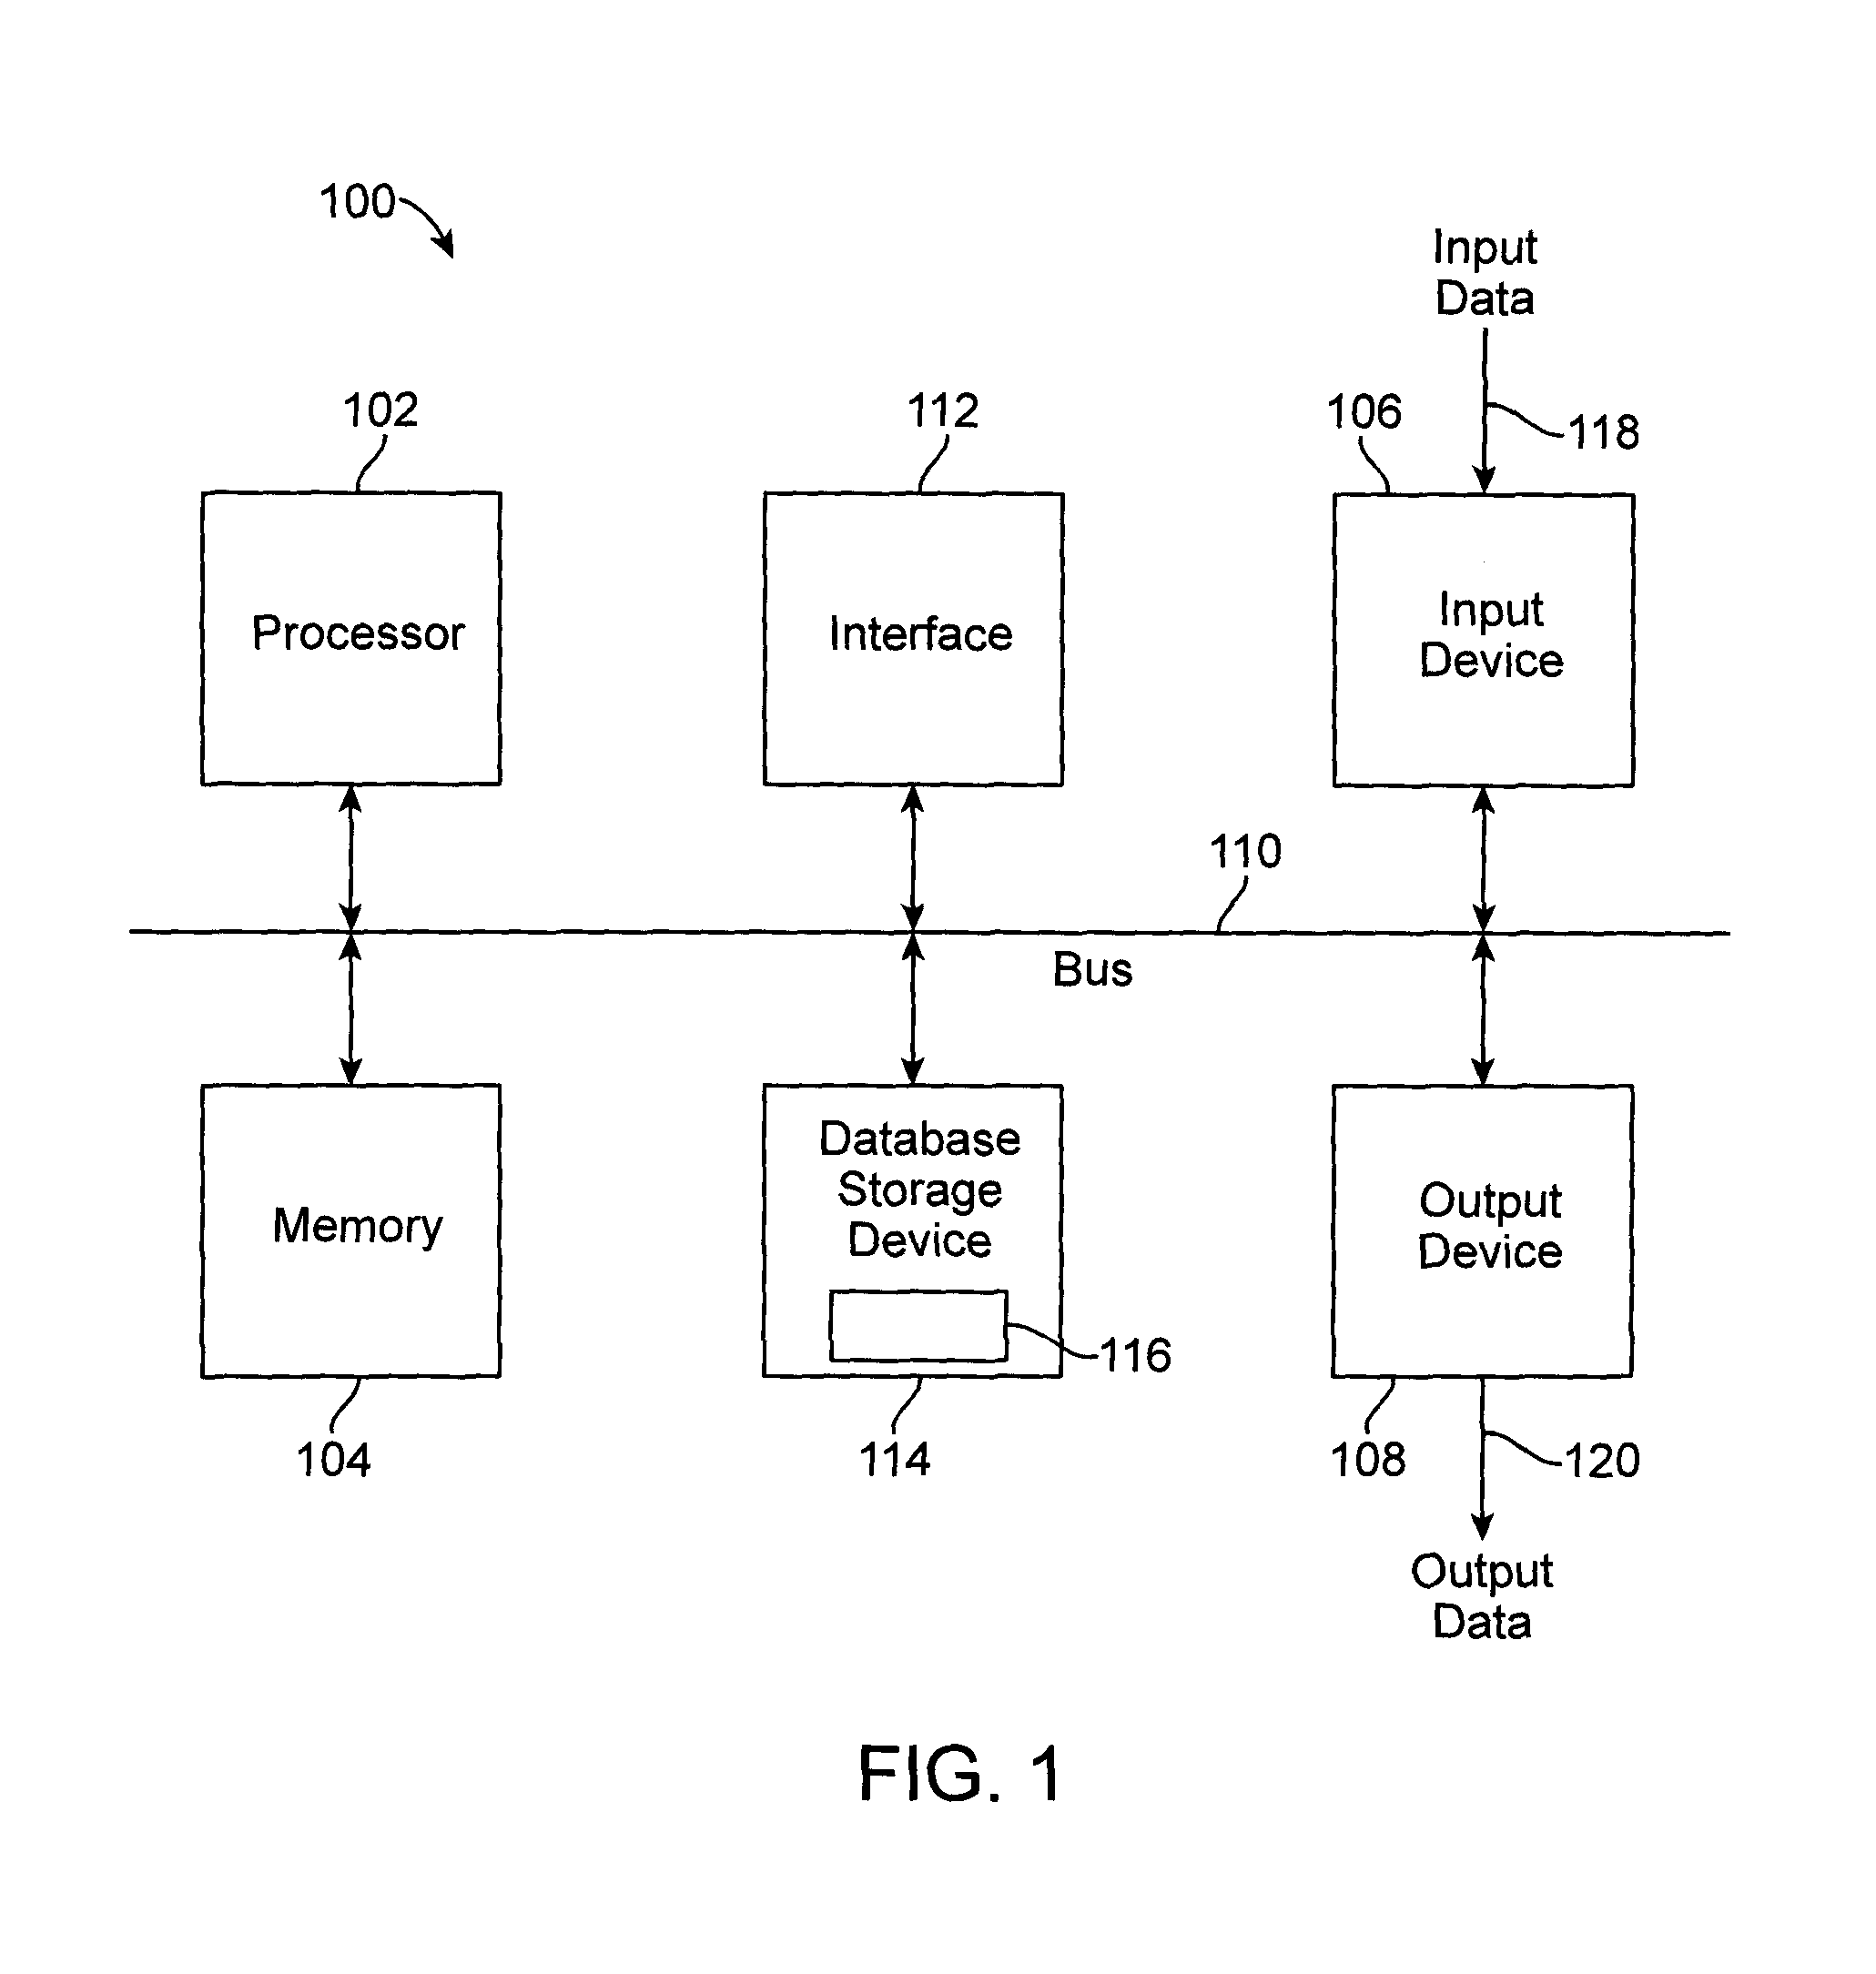 Methods and compositions for diagnosis of inflammatory liver disease